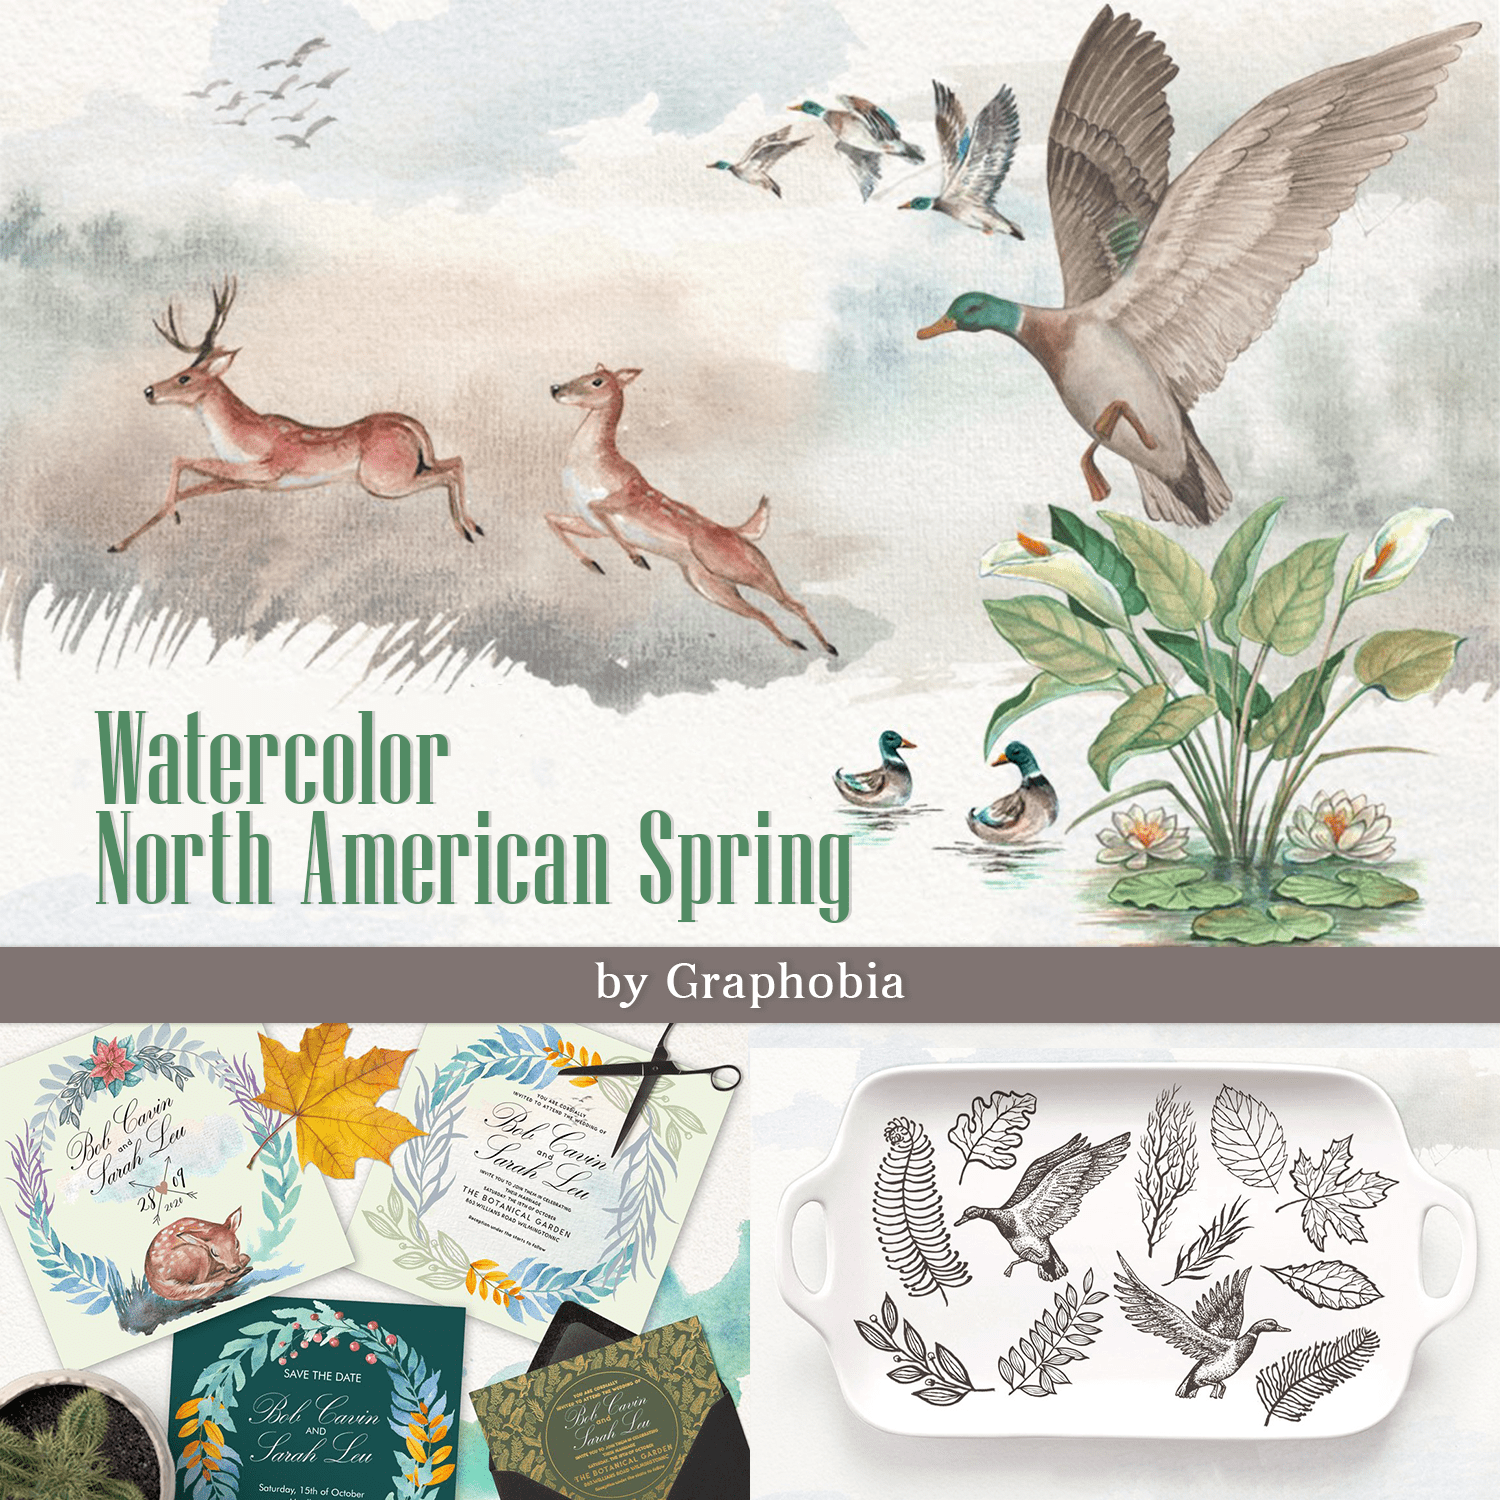 Watercolor North American Spring cover image.